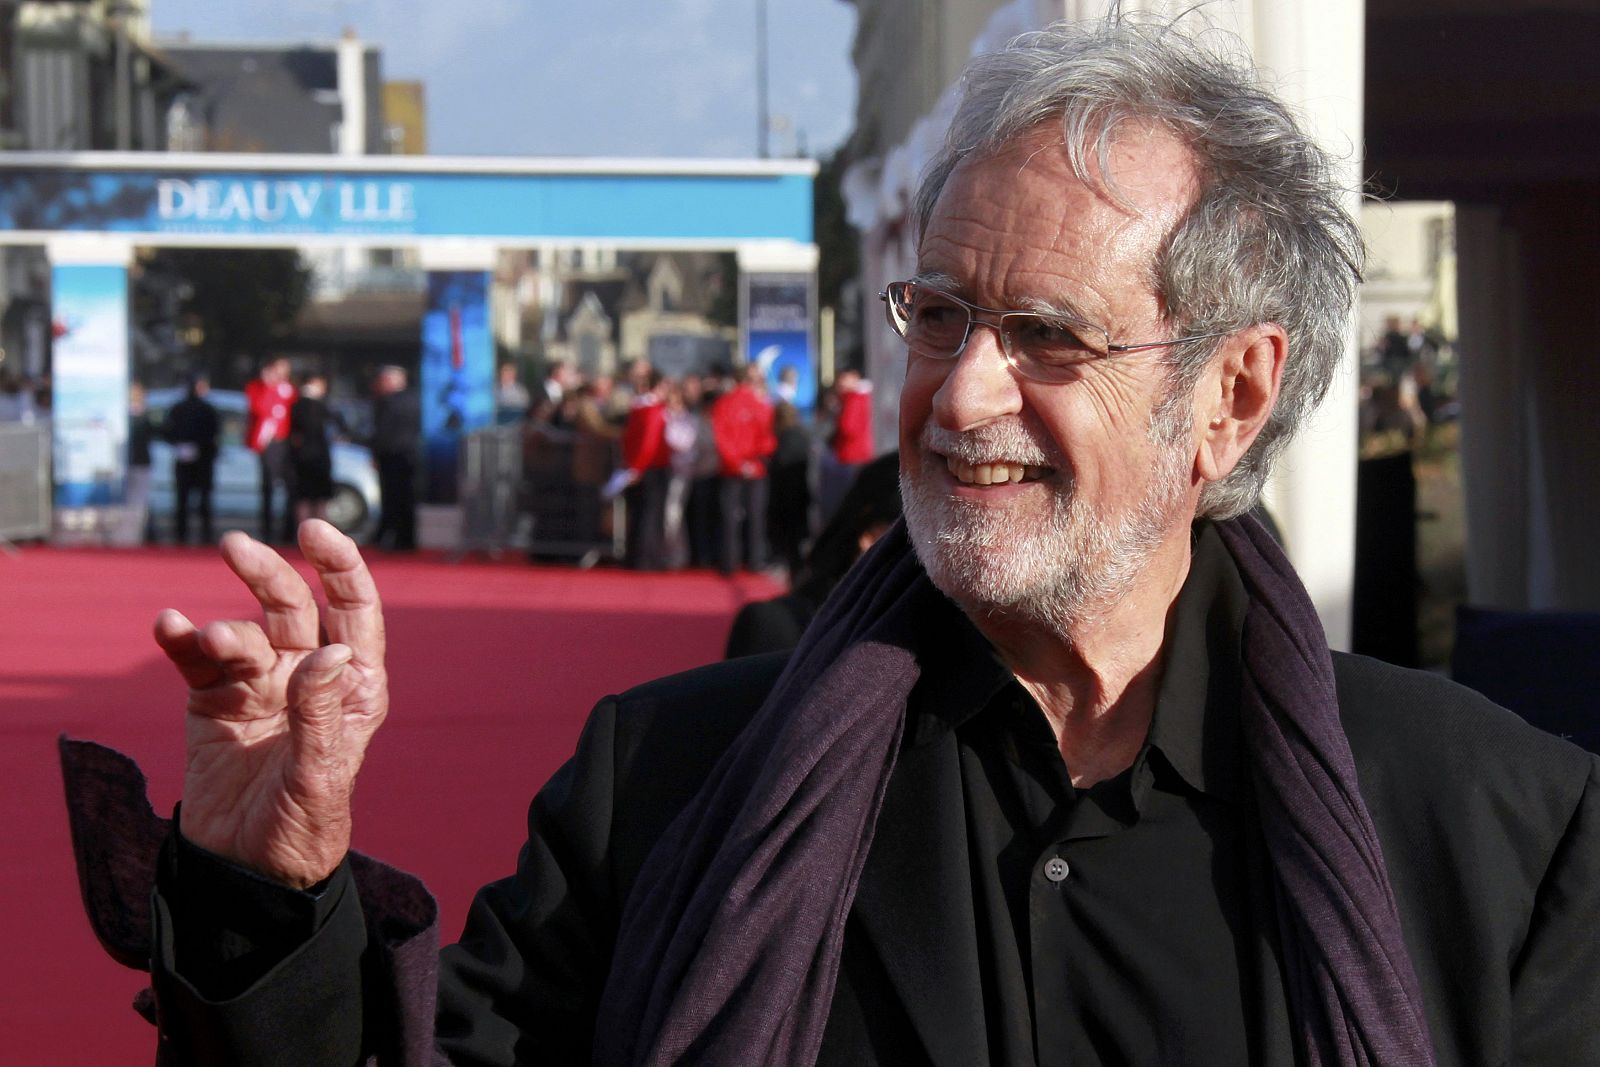 File photo of French director Molinaro as he arrived at the opening of the Deauville American Film Festival